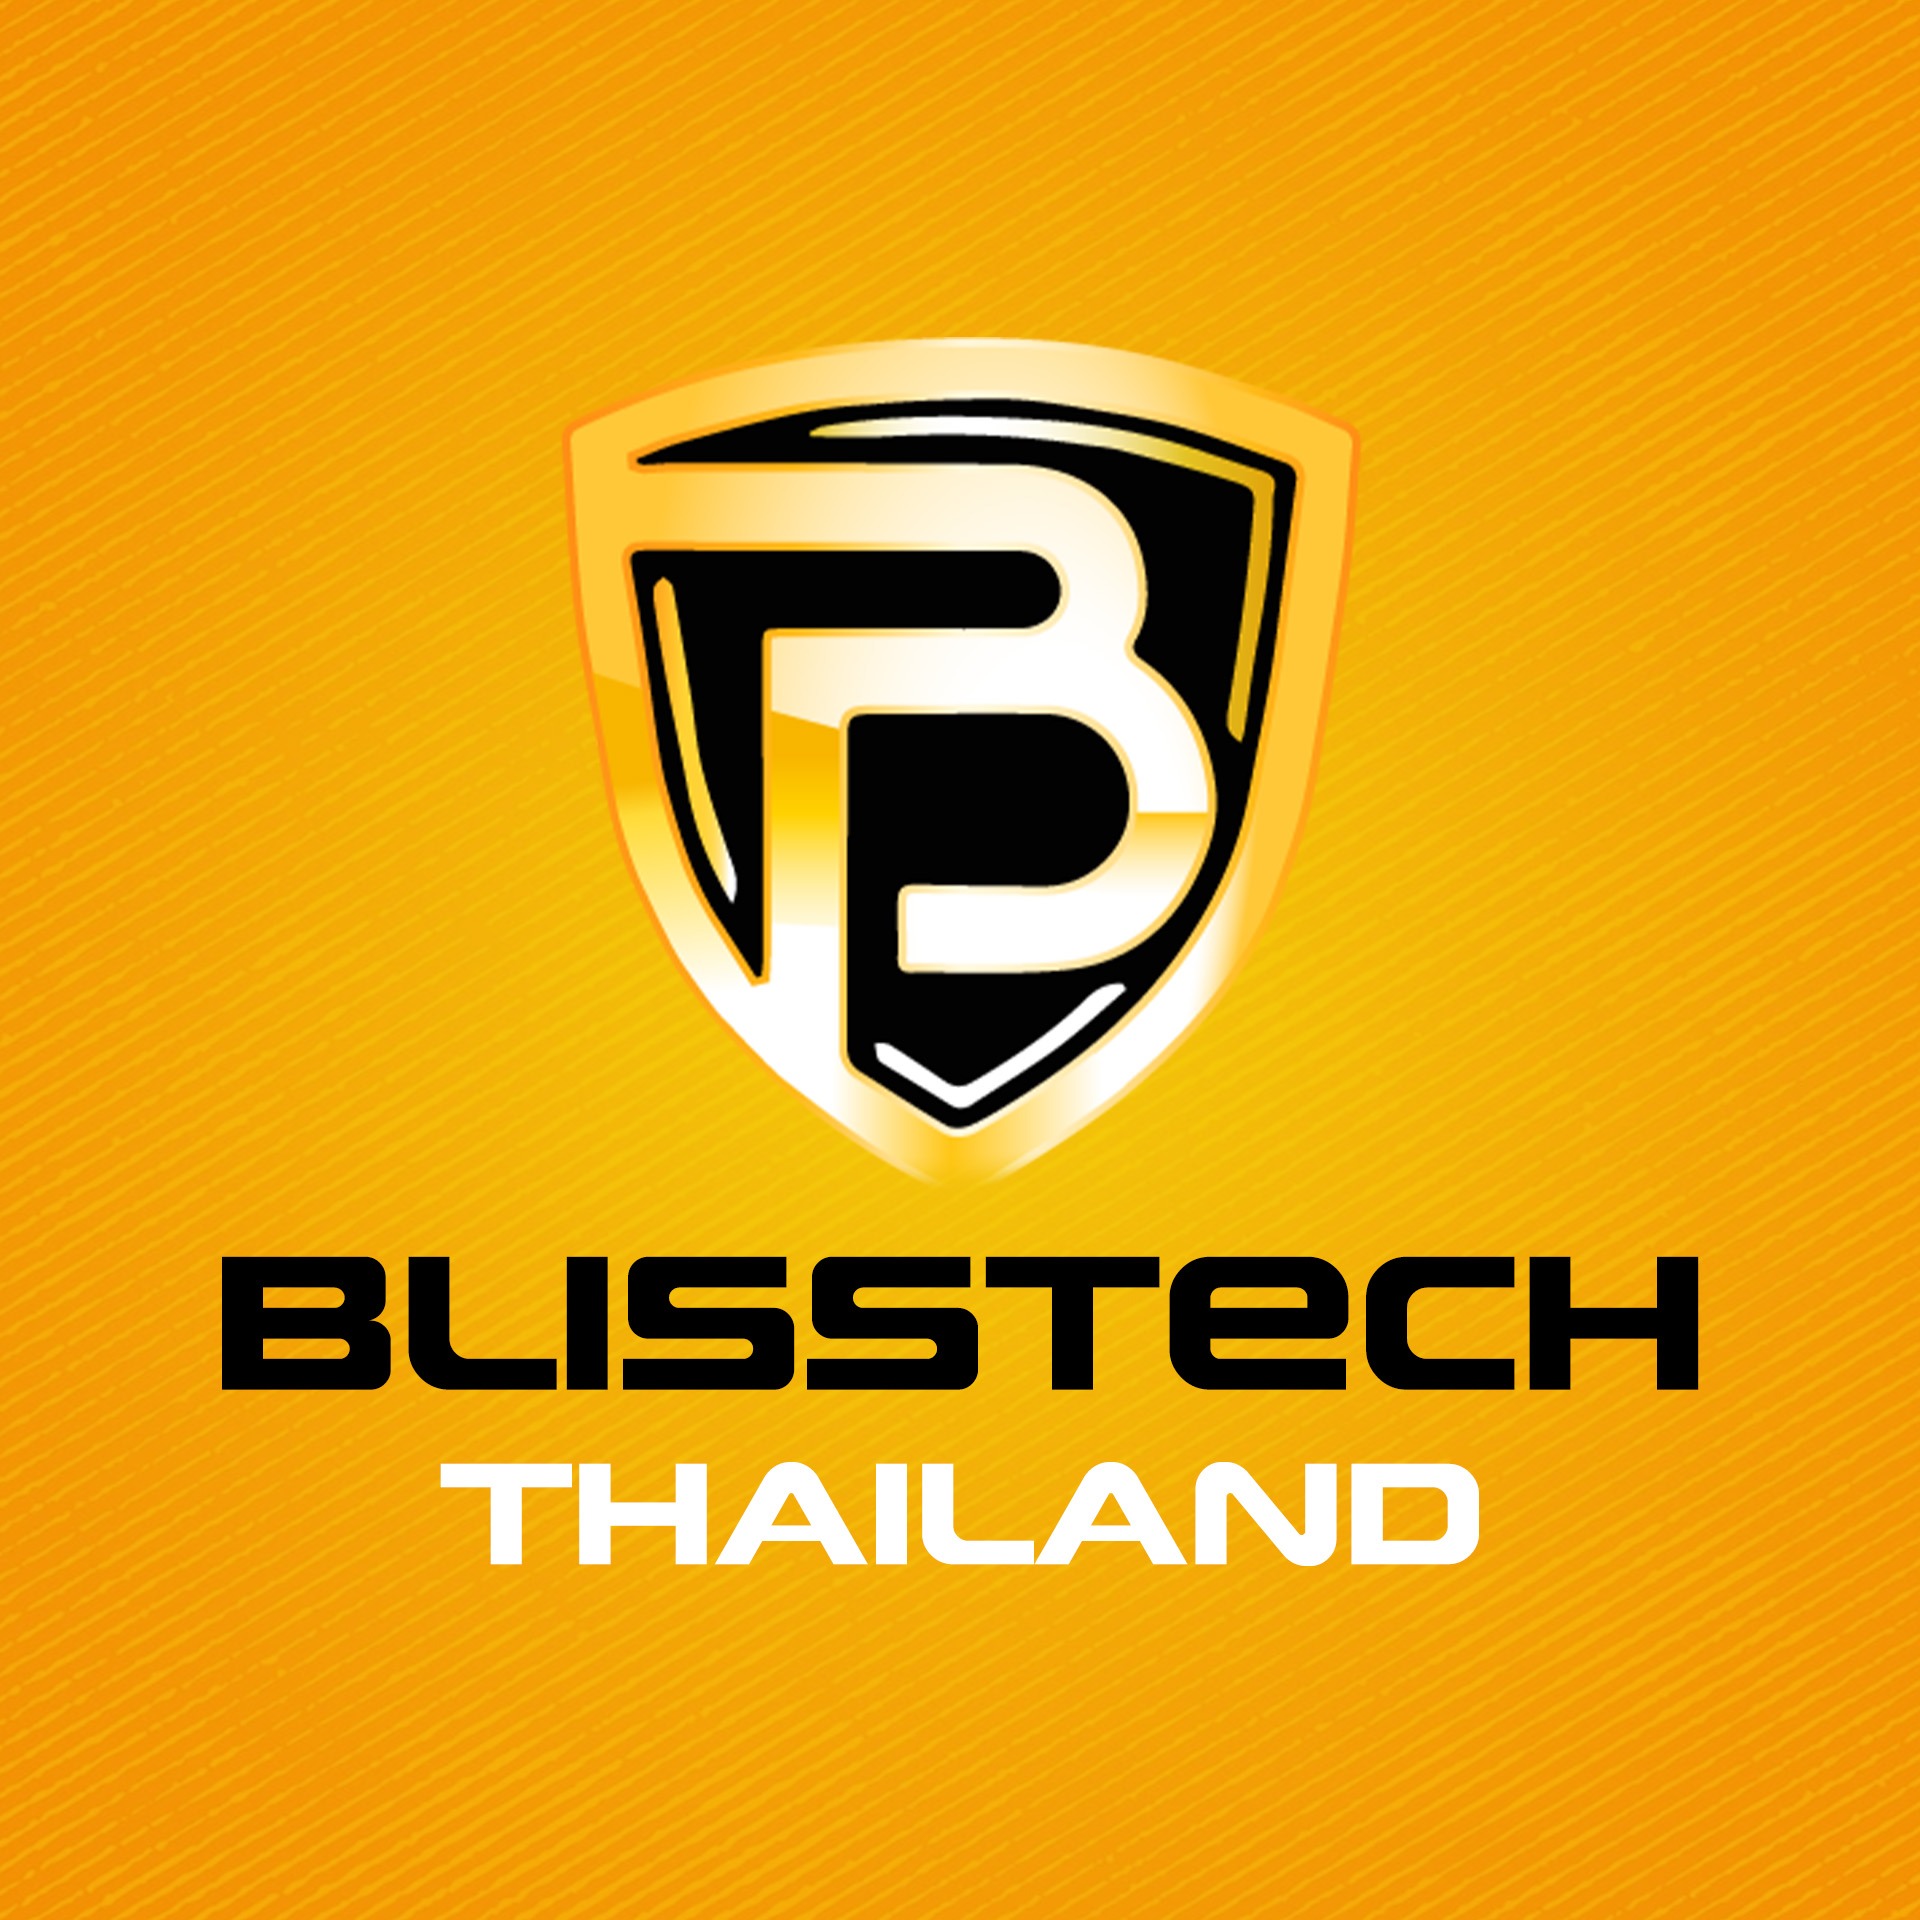 Ready go to ... https://www.lazada.co.th/shop/blisstech-thailand [ BLISSTECH THAILAND | TH]